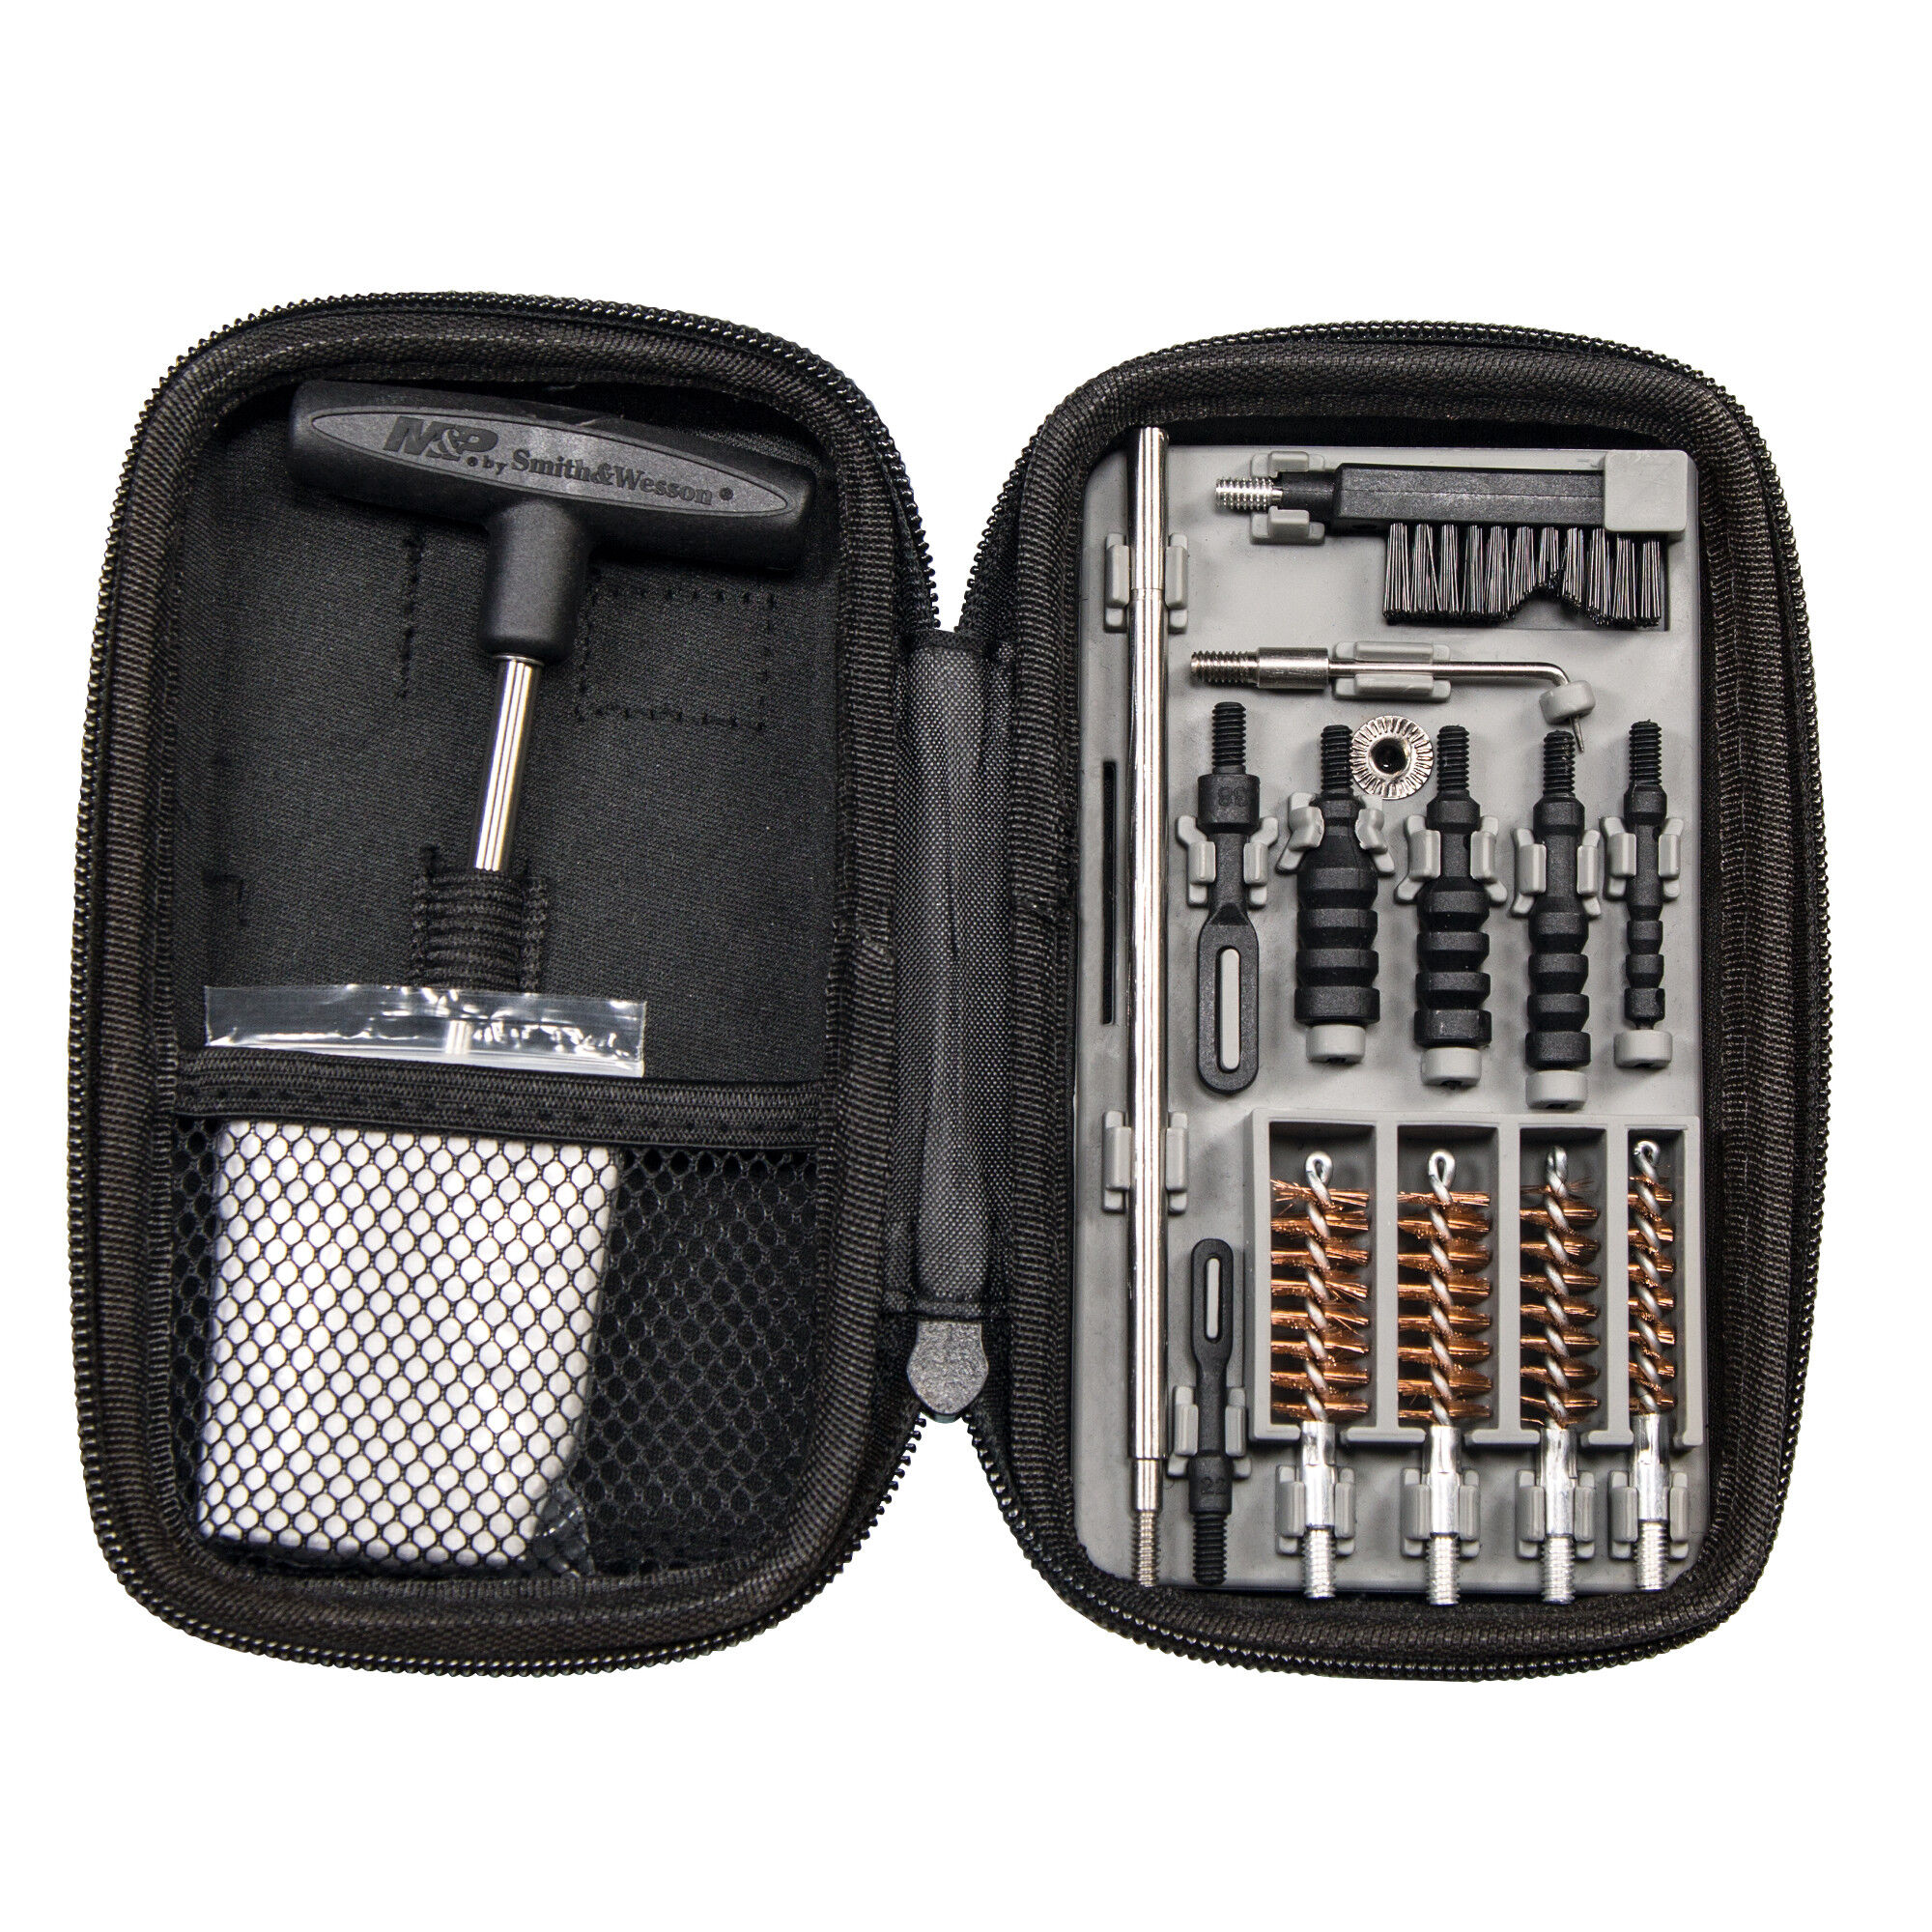 M&P® Compact Pistol Cleaning Kit